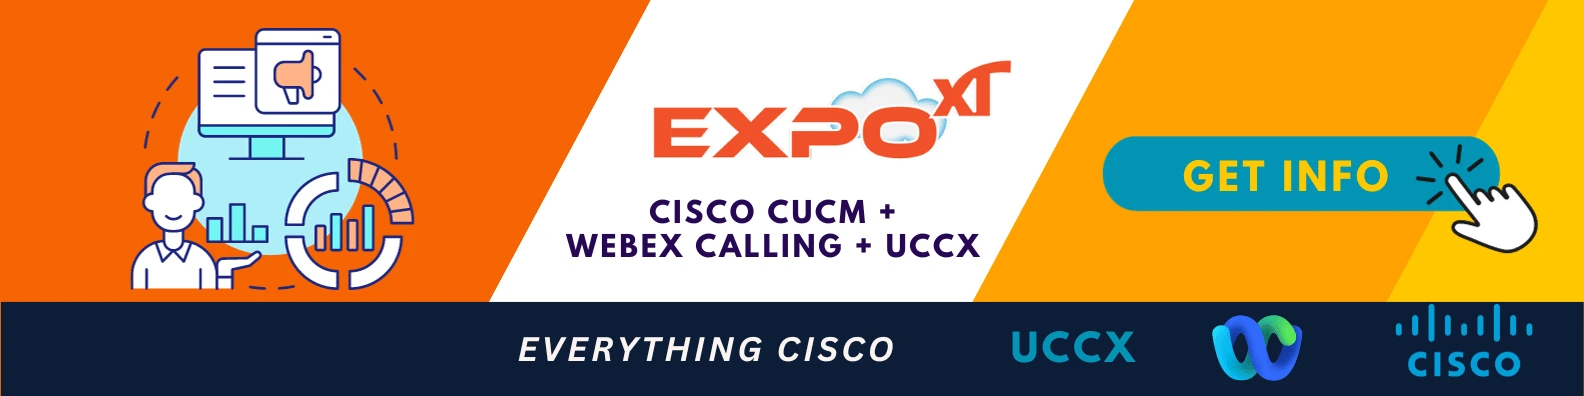 cta image of expo xt compatibility showing logos for cisco cucm, webex calling, and uccx reporting